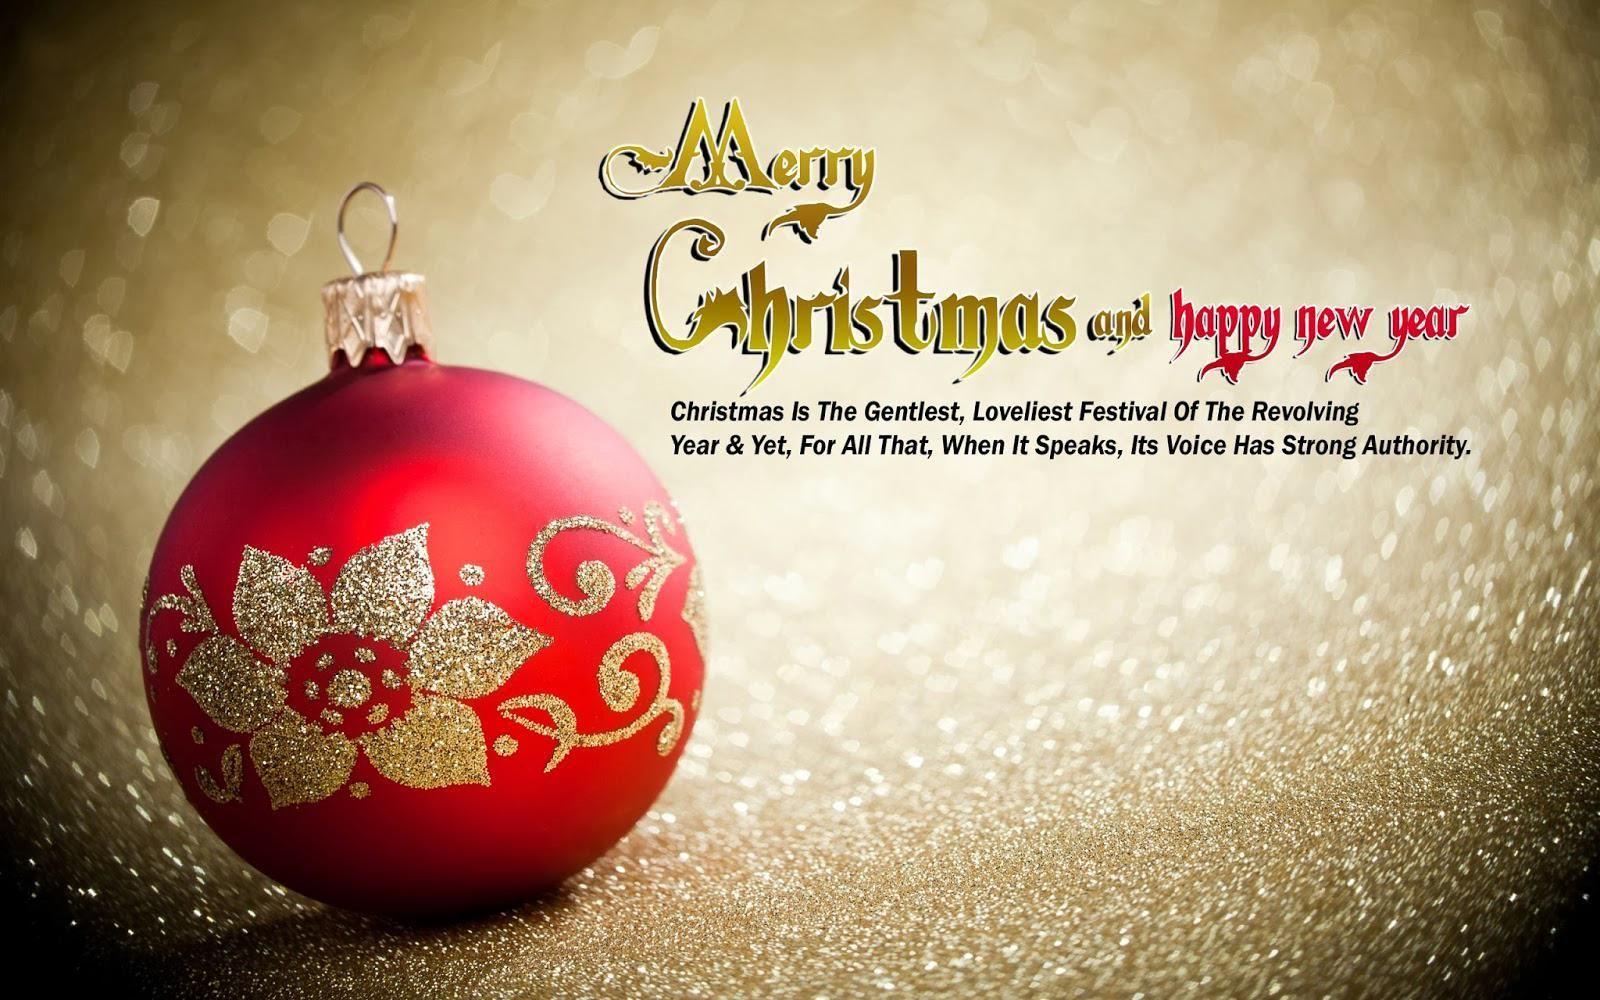 merry christmas and happy new year wallpaper. Merry christmas card greetings, Merry christmas wishes, Merry christmas card